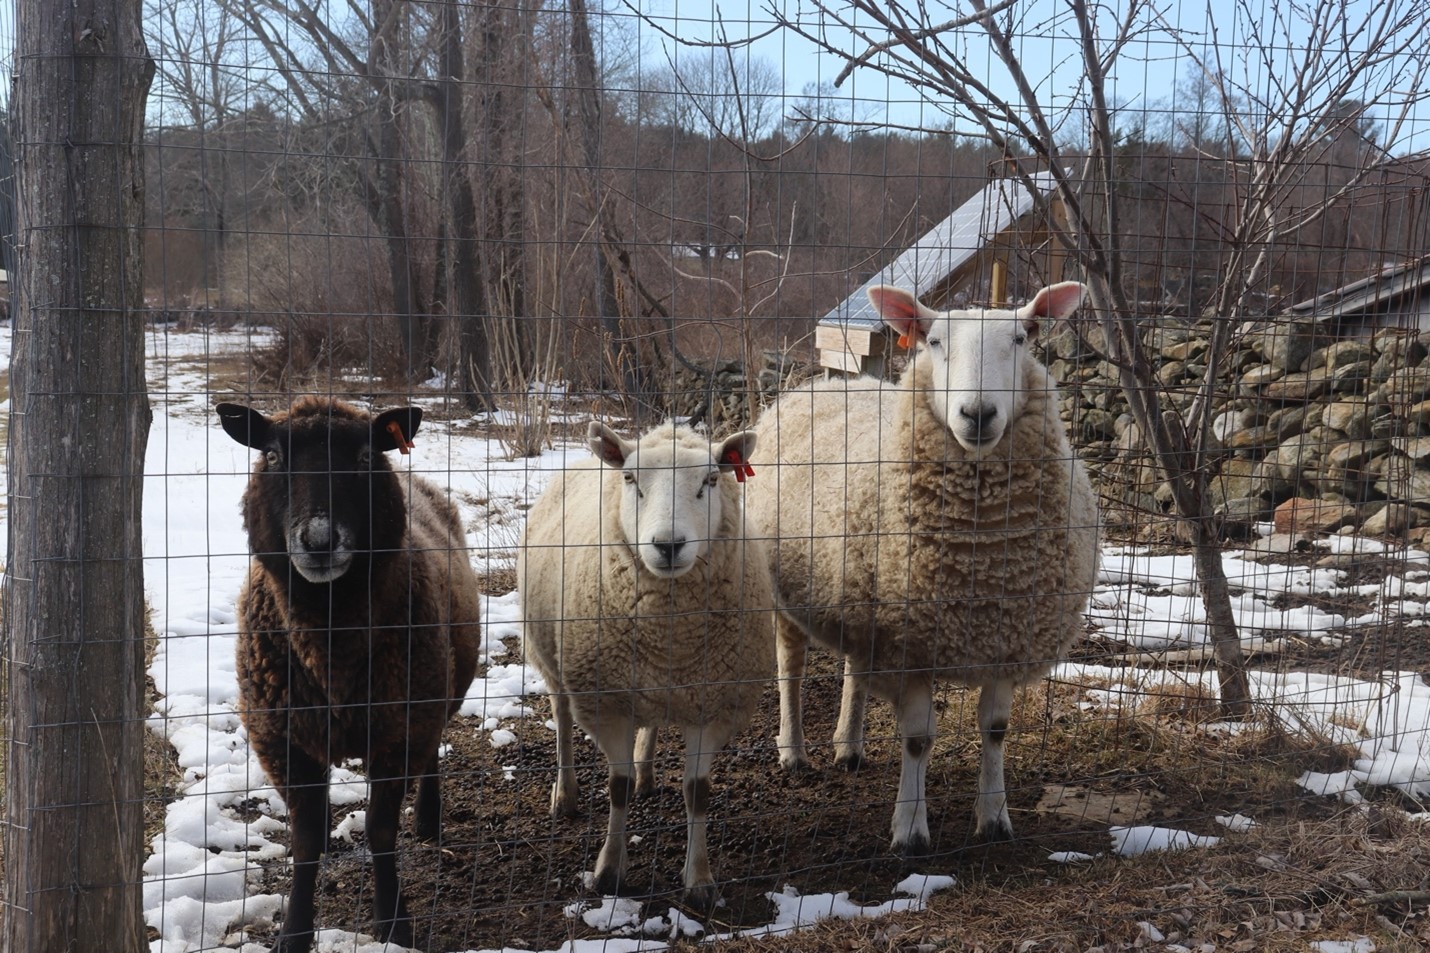 sheep standing behind a fence